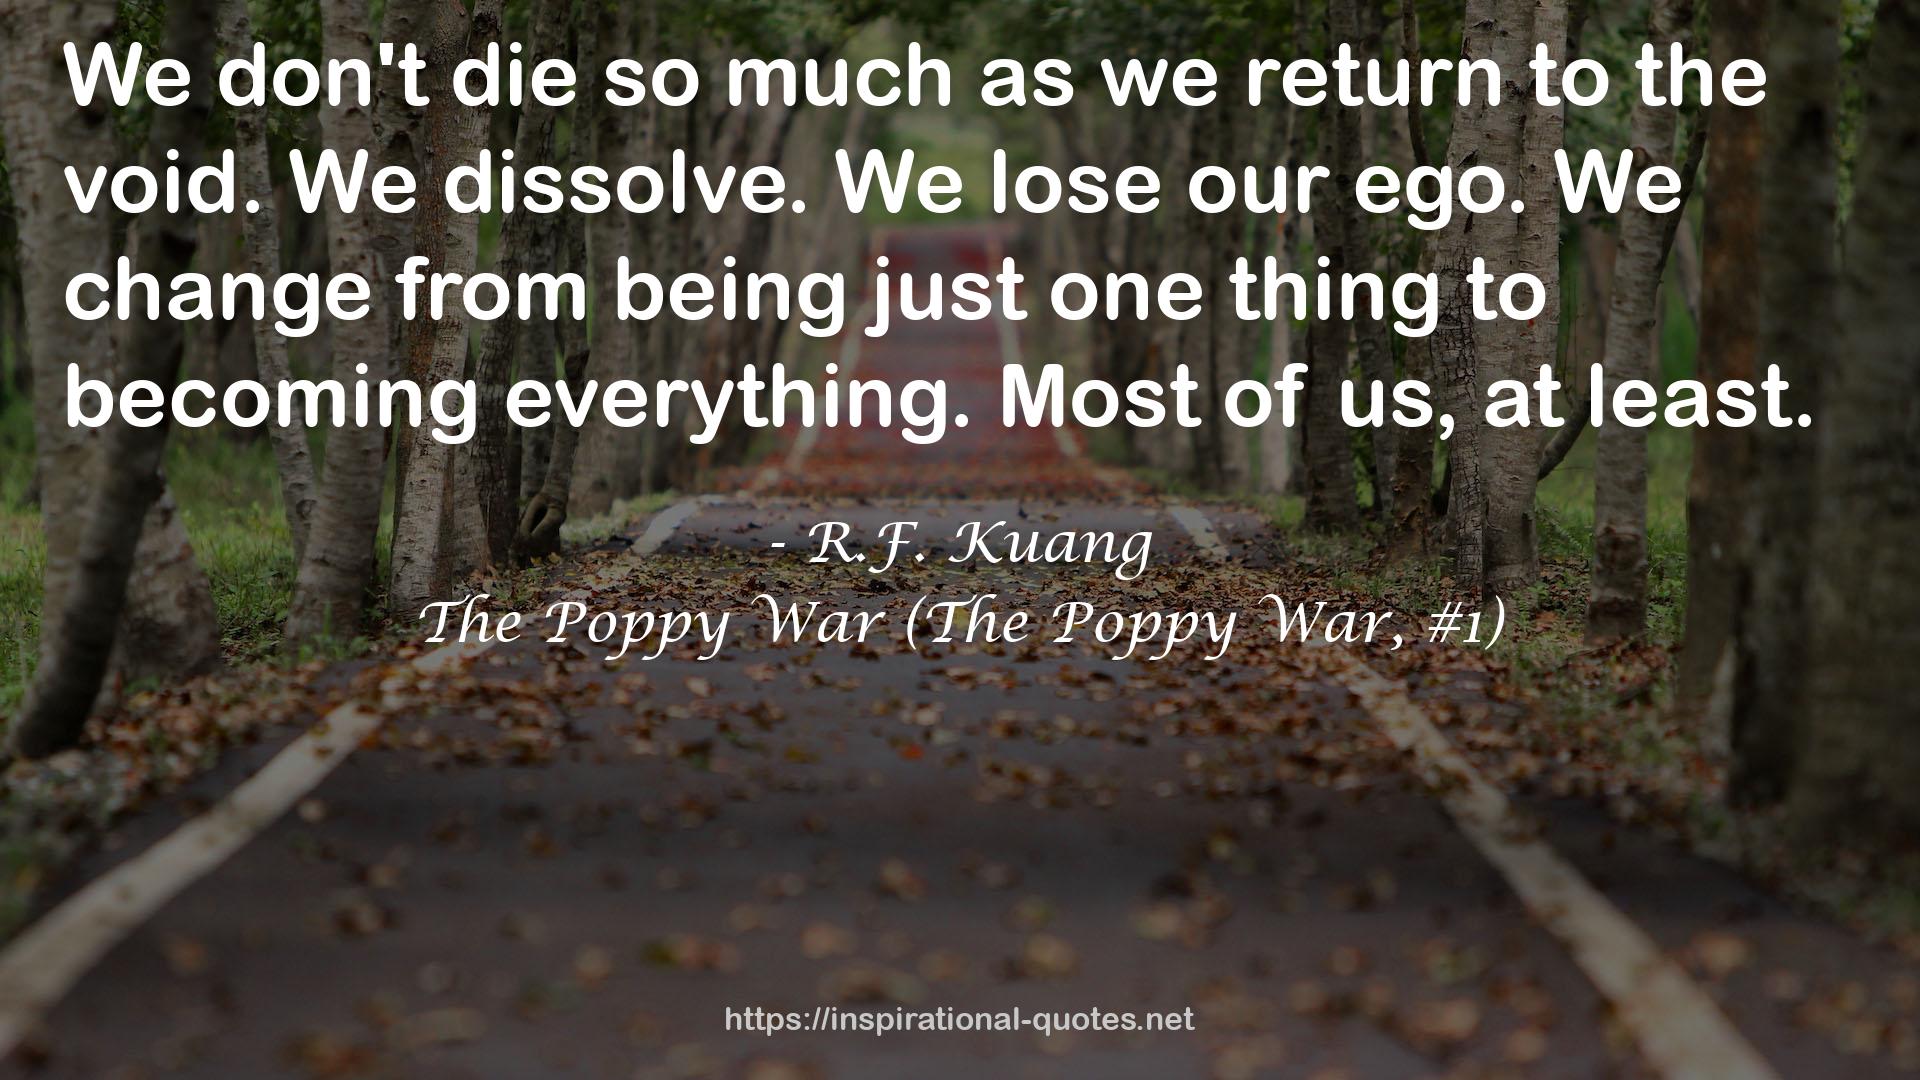 R.F. Kuang QUOTES